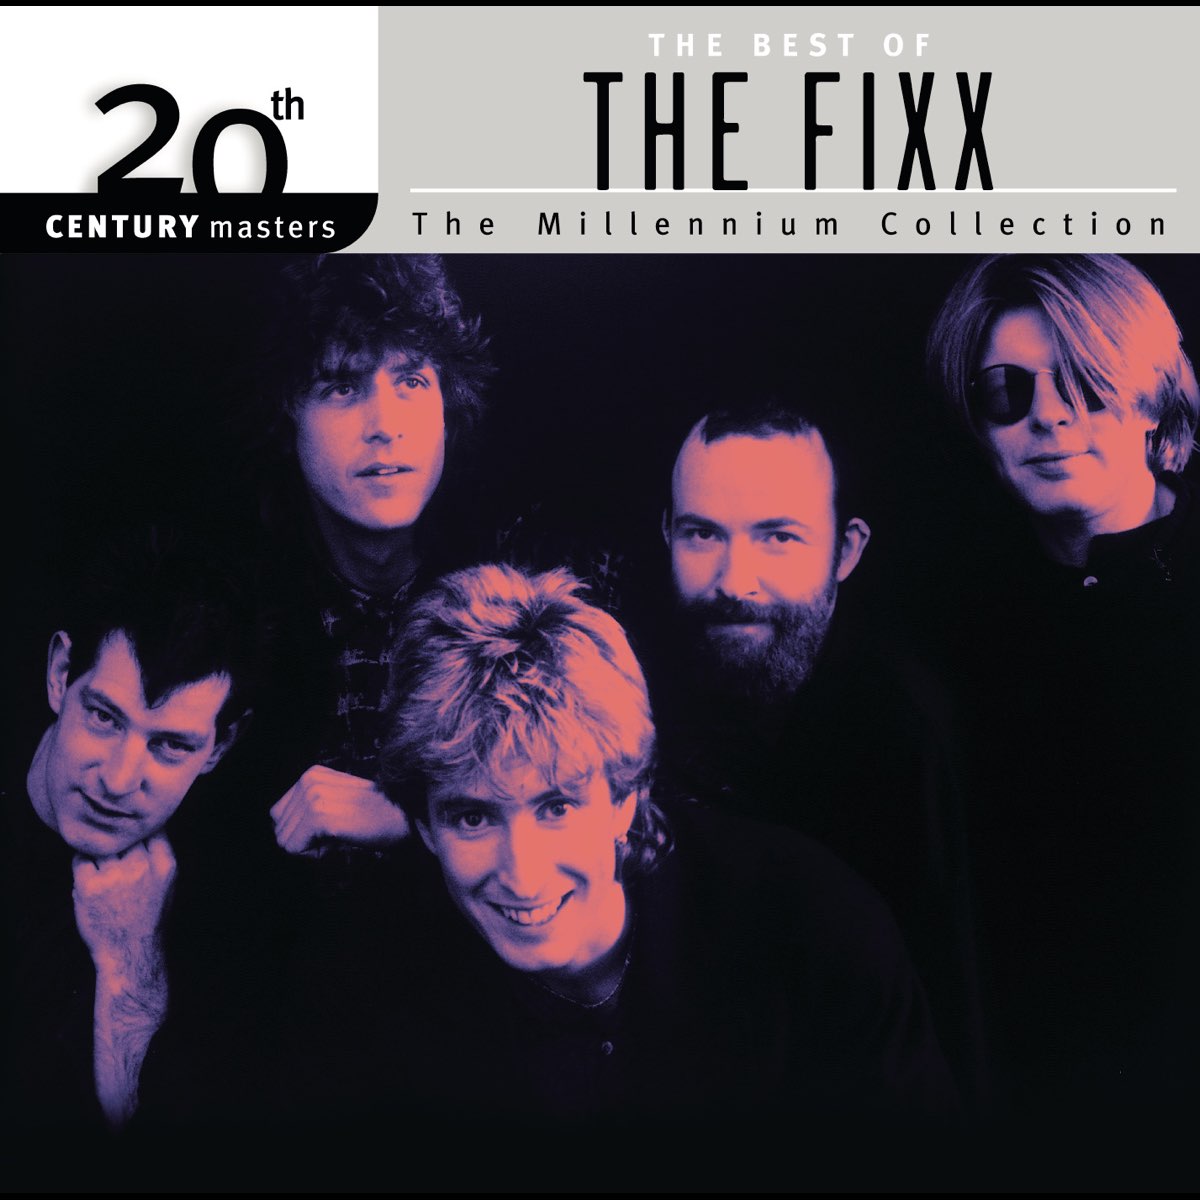 20th Century Masters - The Millennium Collection: The Best of the 